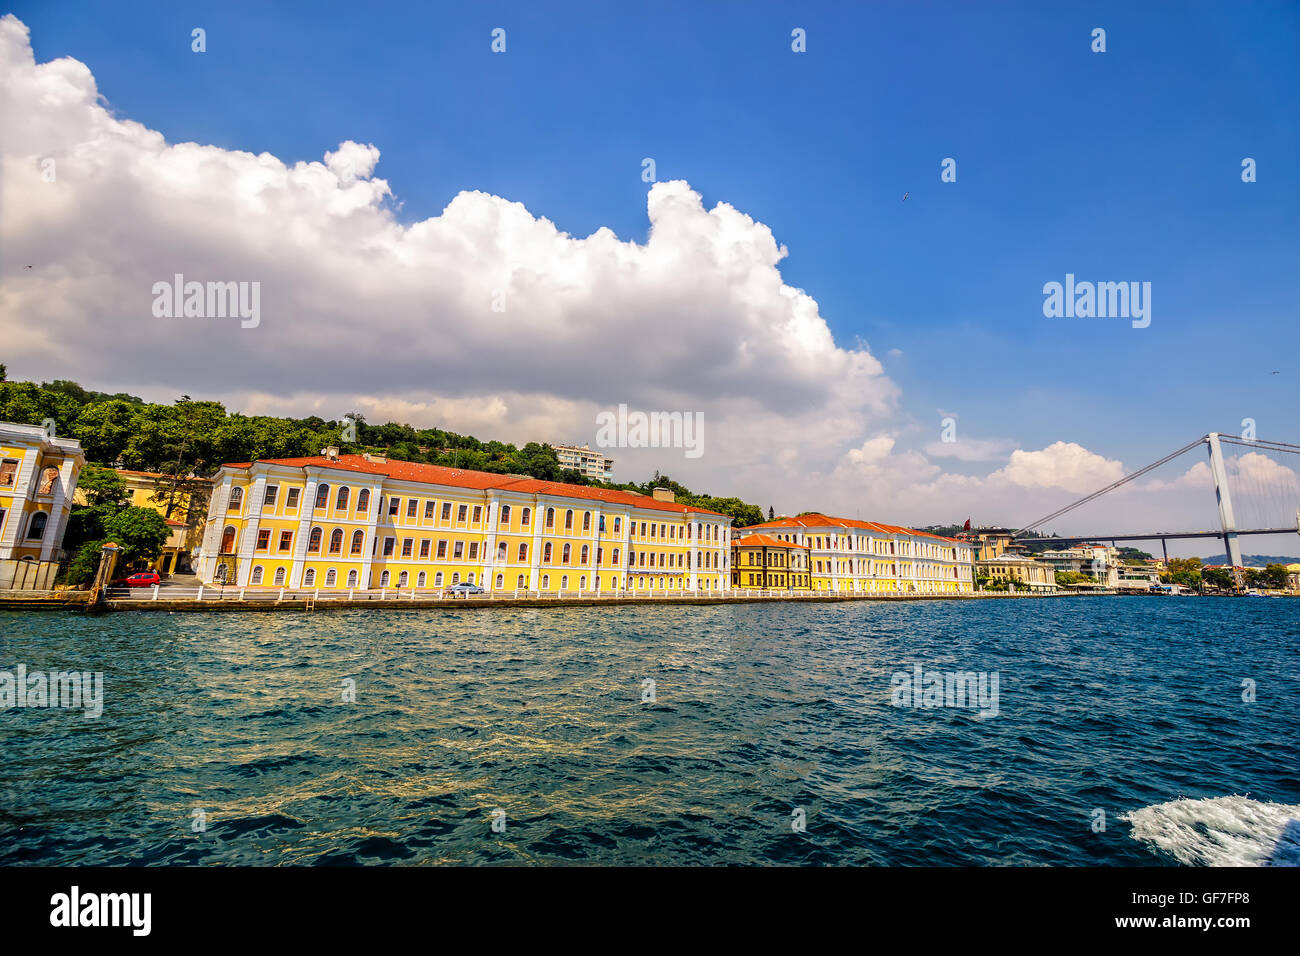 ISTANBUL - AUGUST 18: Galatasaray University August 18, 2015 in Istanbul. View from the boat on the Galatasaray University near Stock Photo